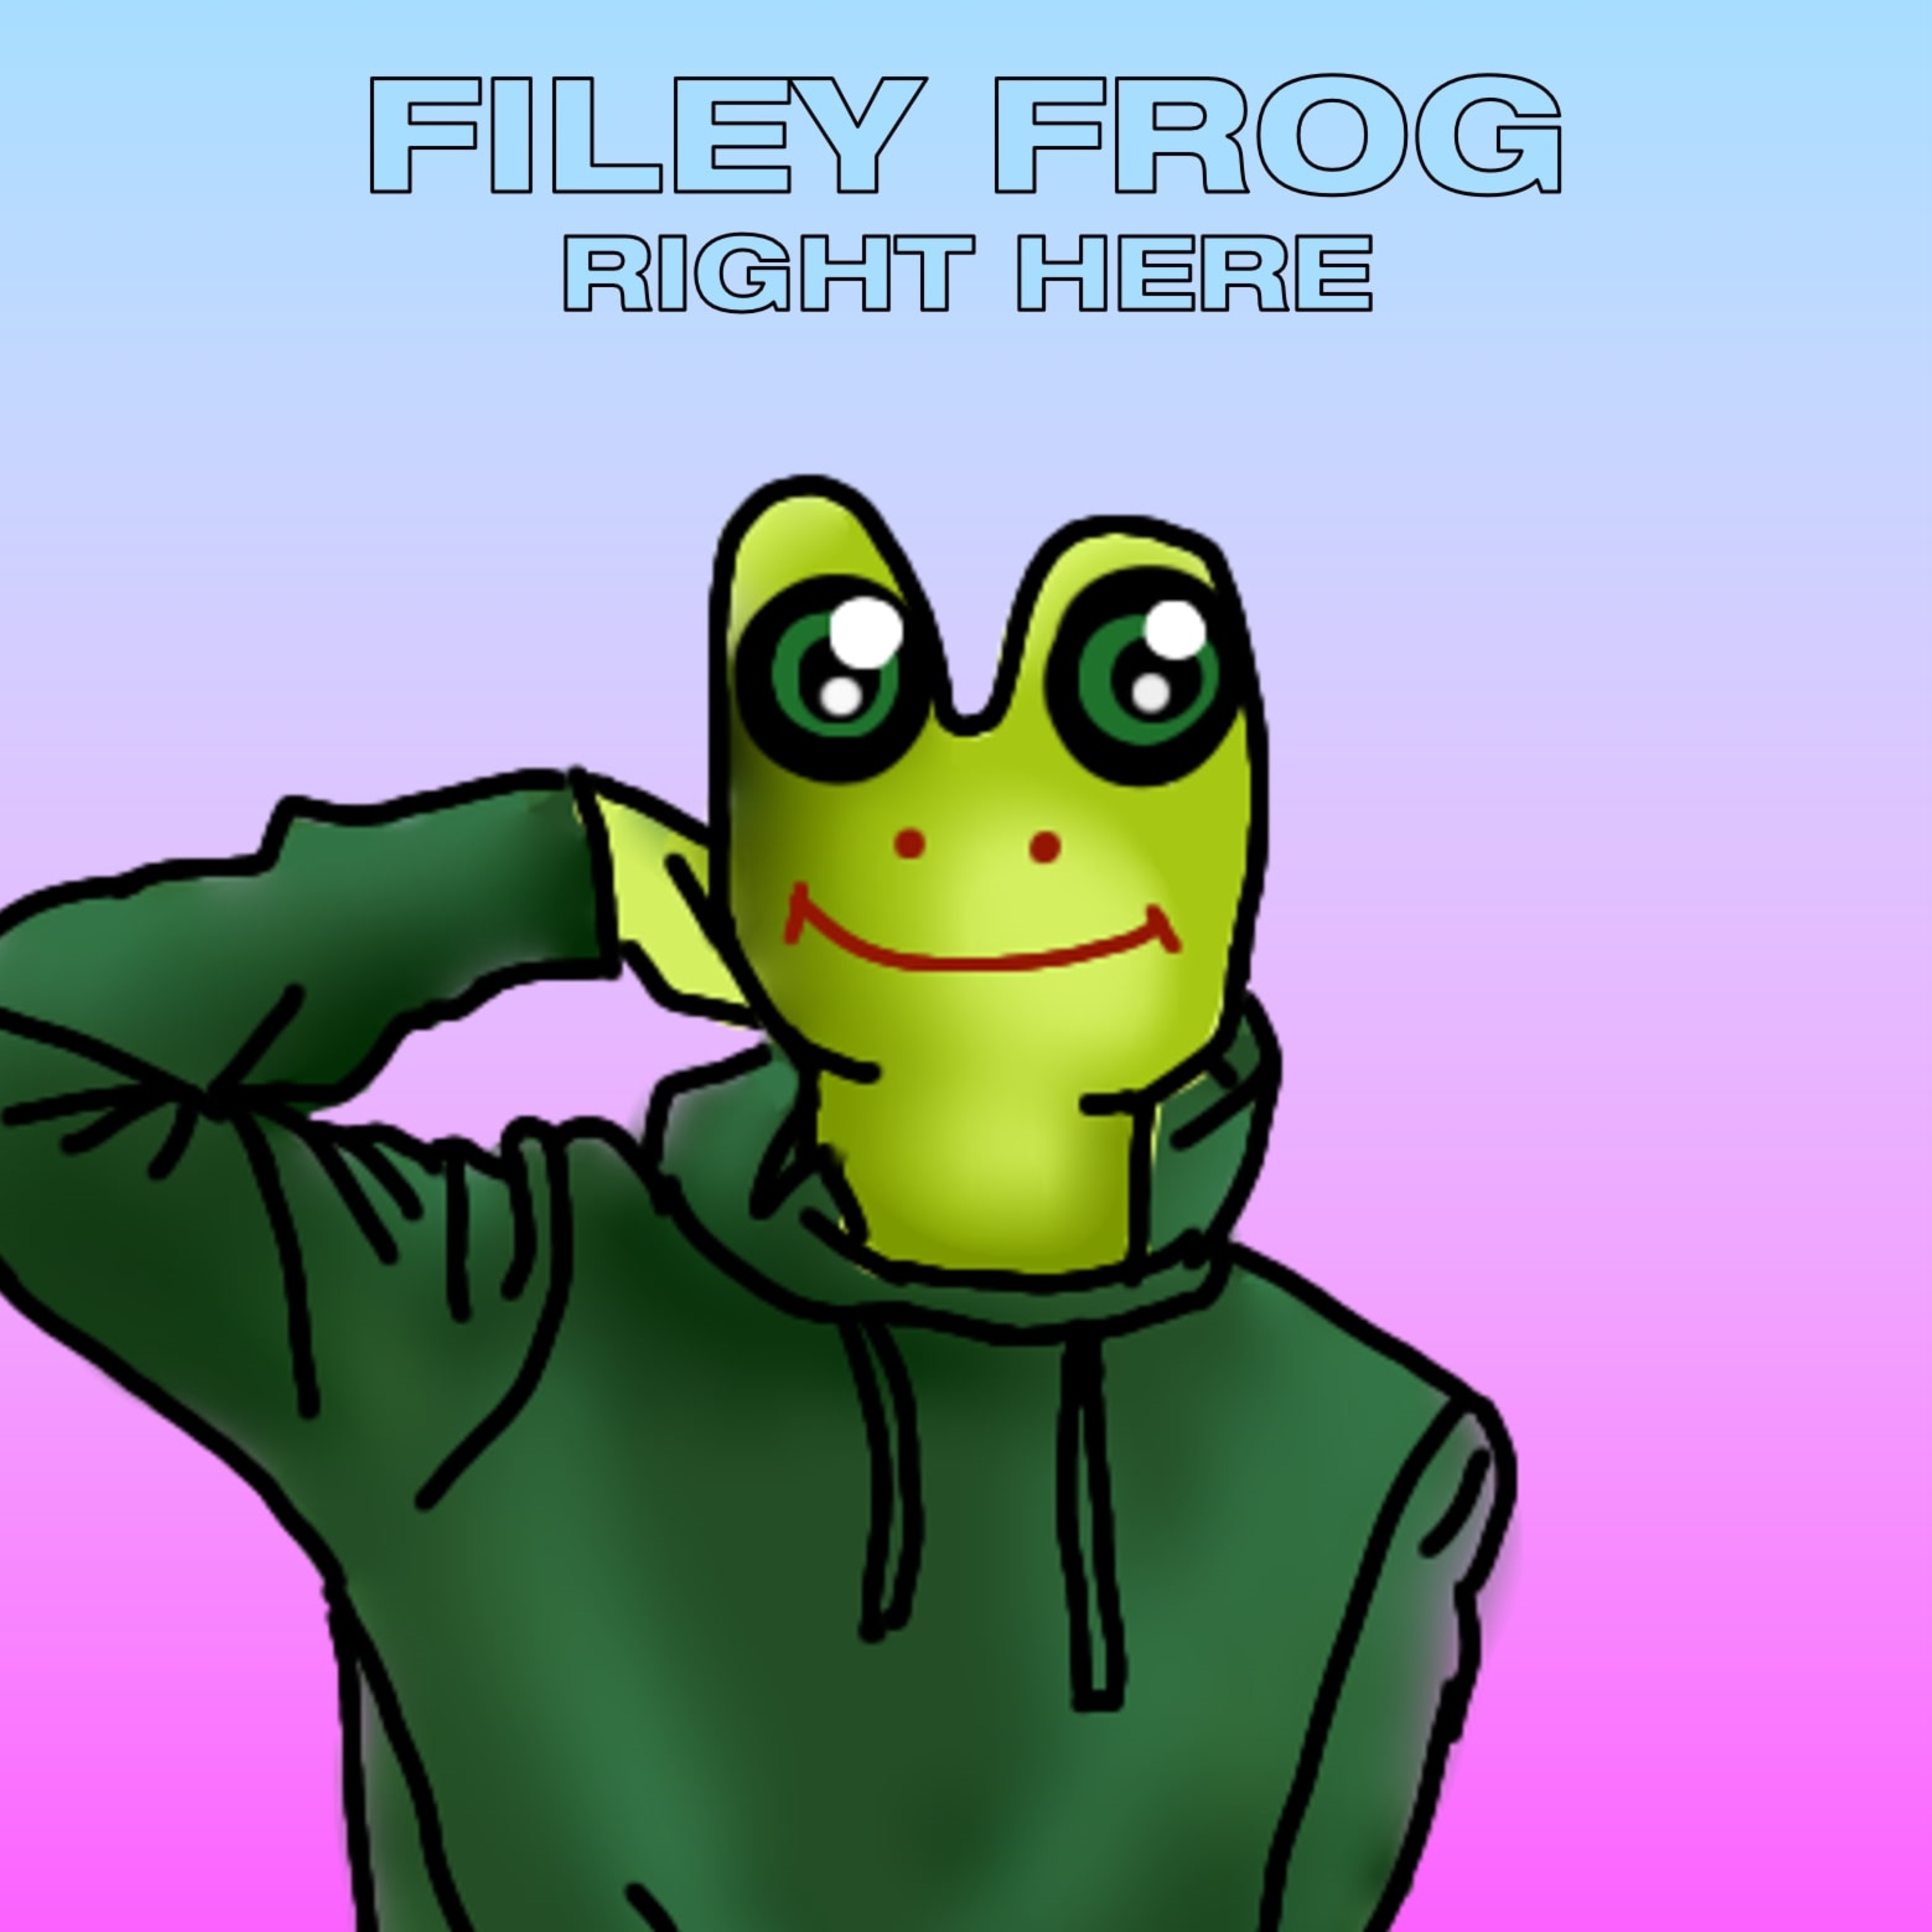 Filey Frog Right Here cover artwork